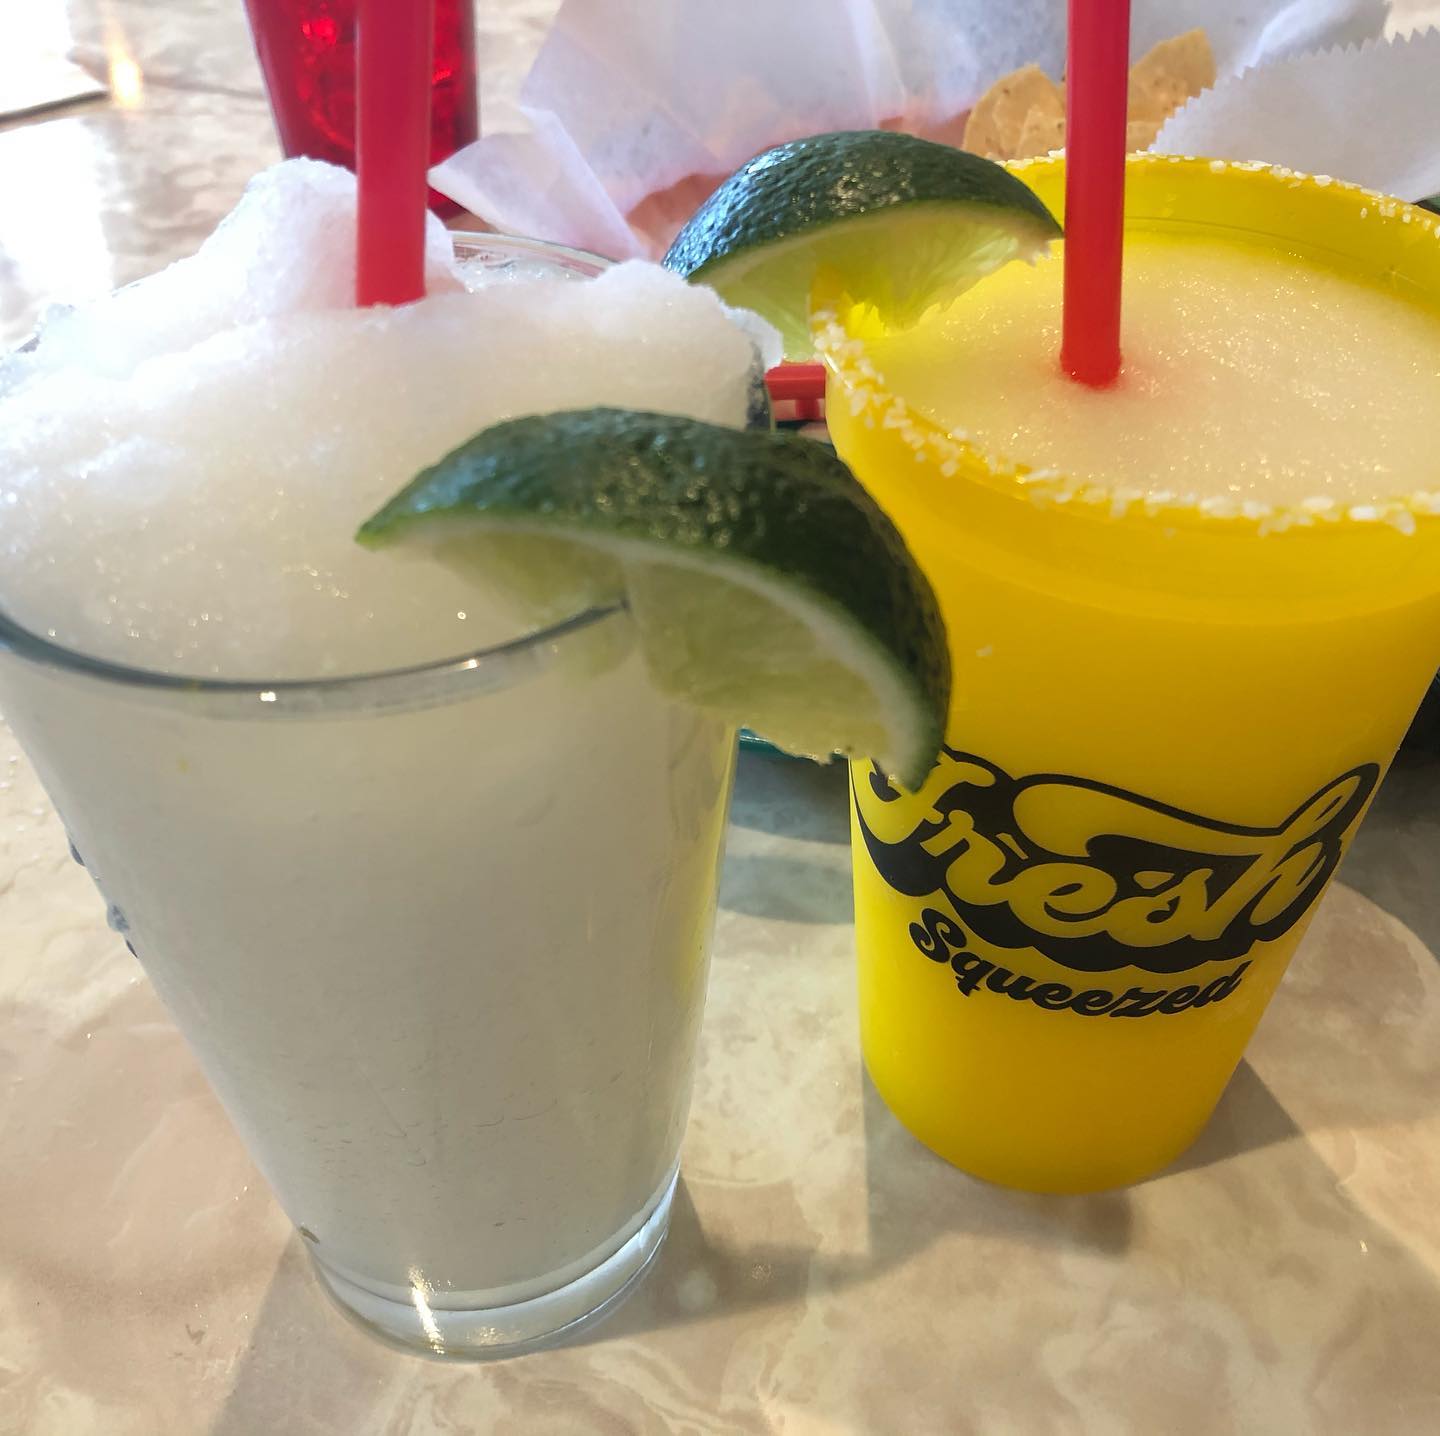 It’s National Margarita Day and @ppunkd and I are celebrating. (One of these is non-alcoholic. Our lawyers made me say that). ¡Cheers, amigos!